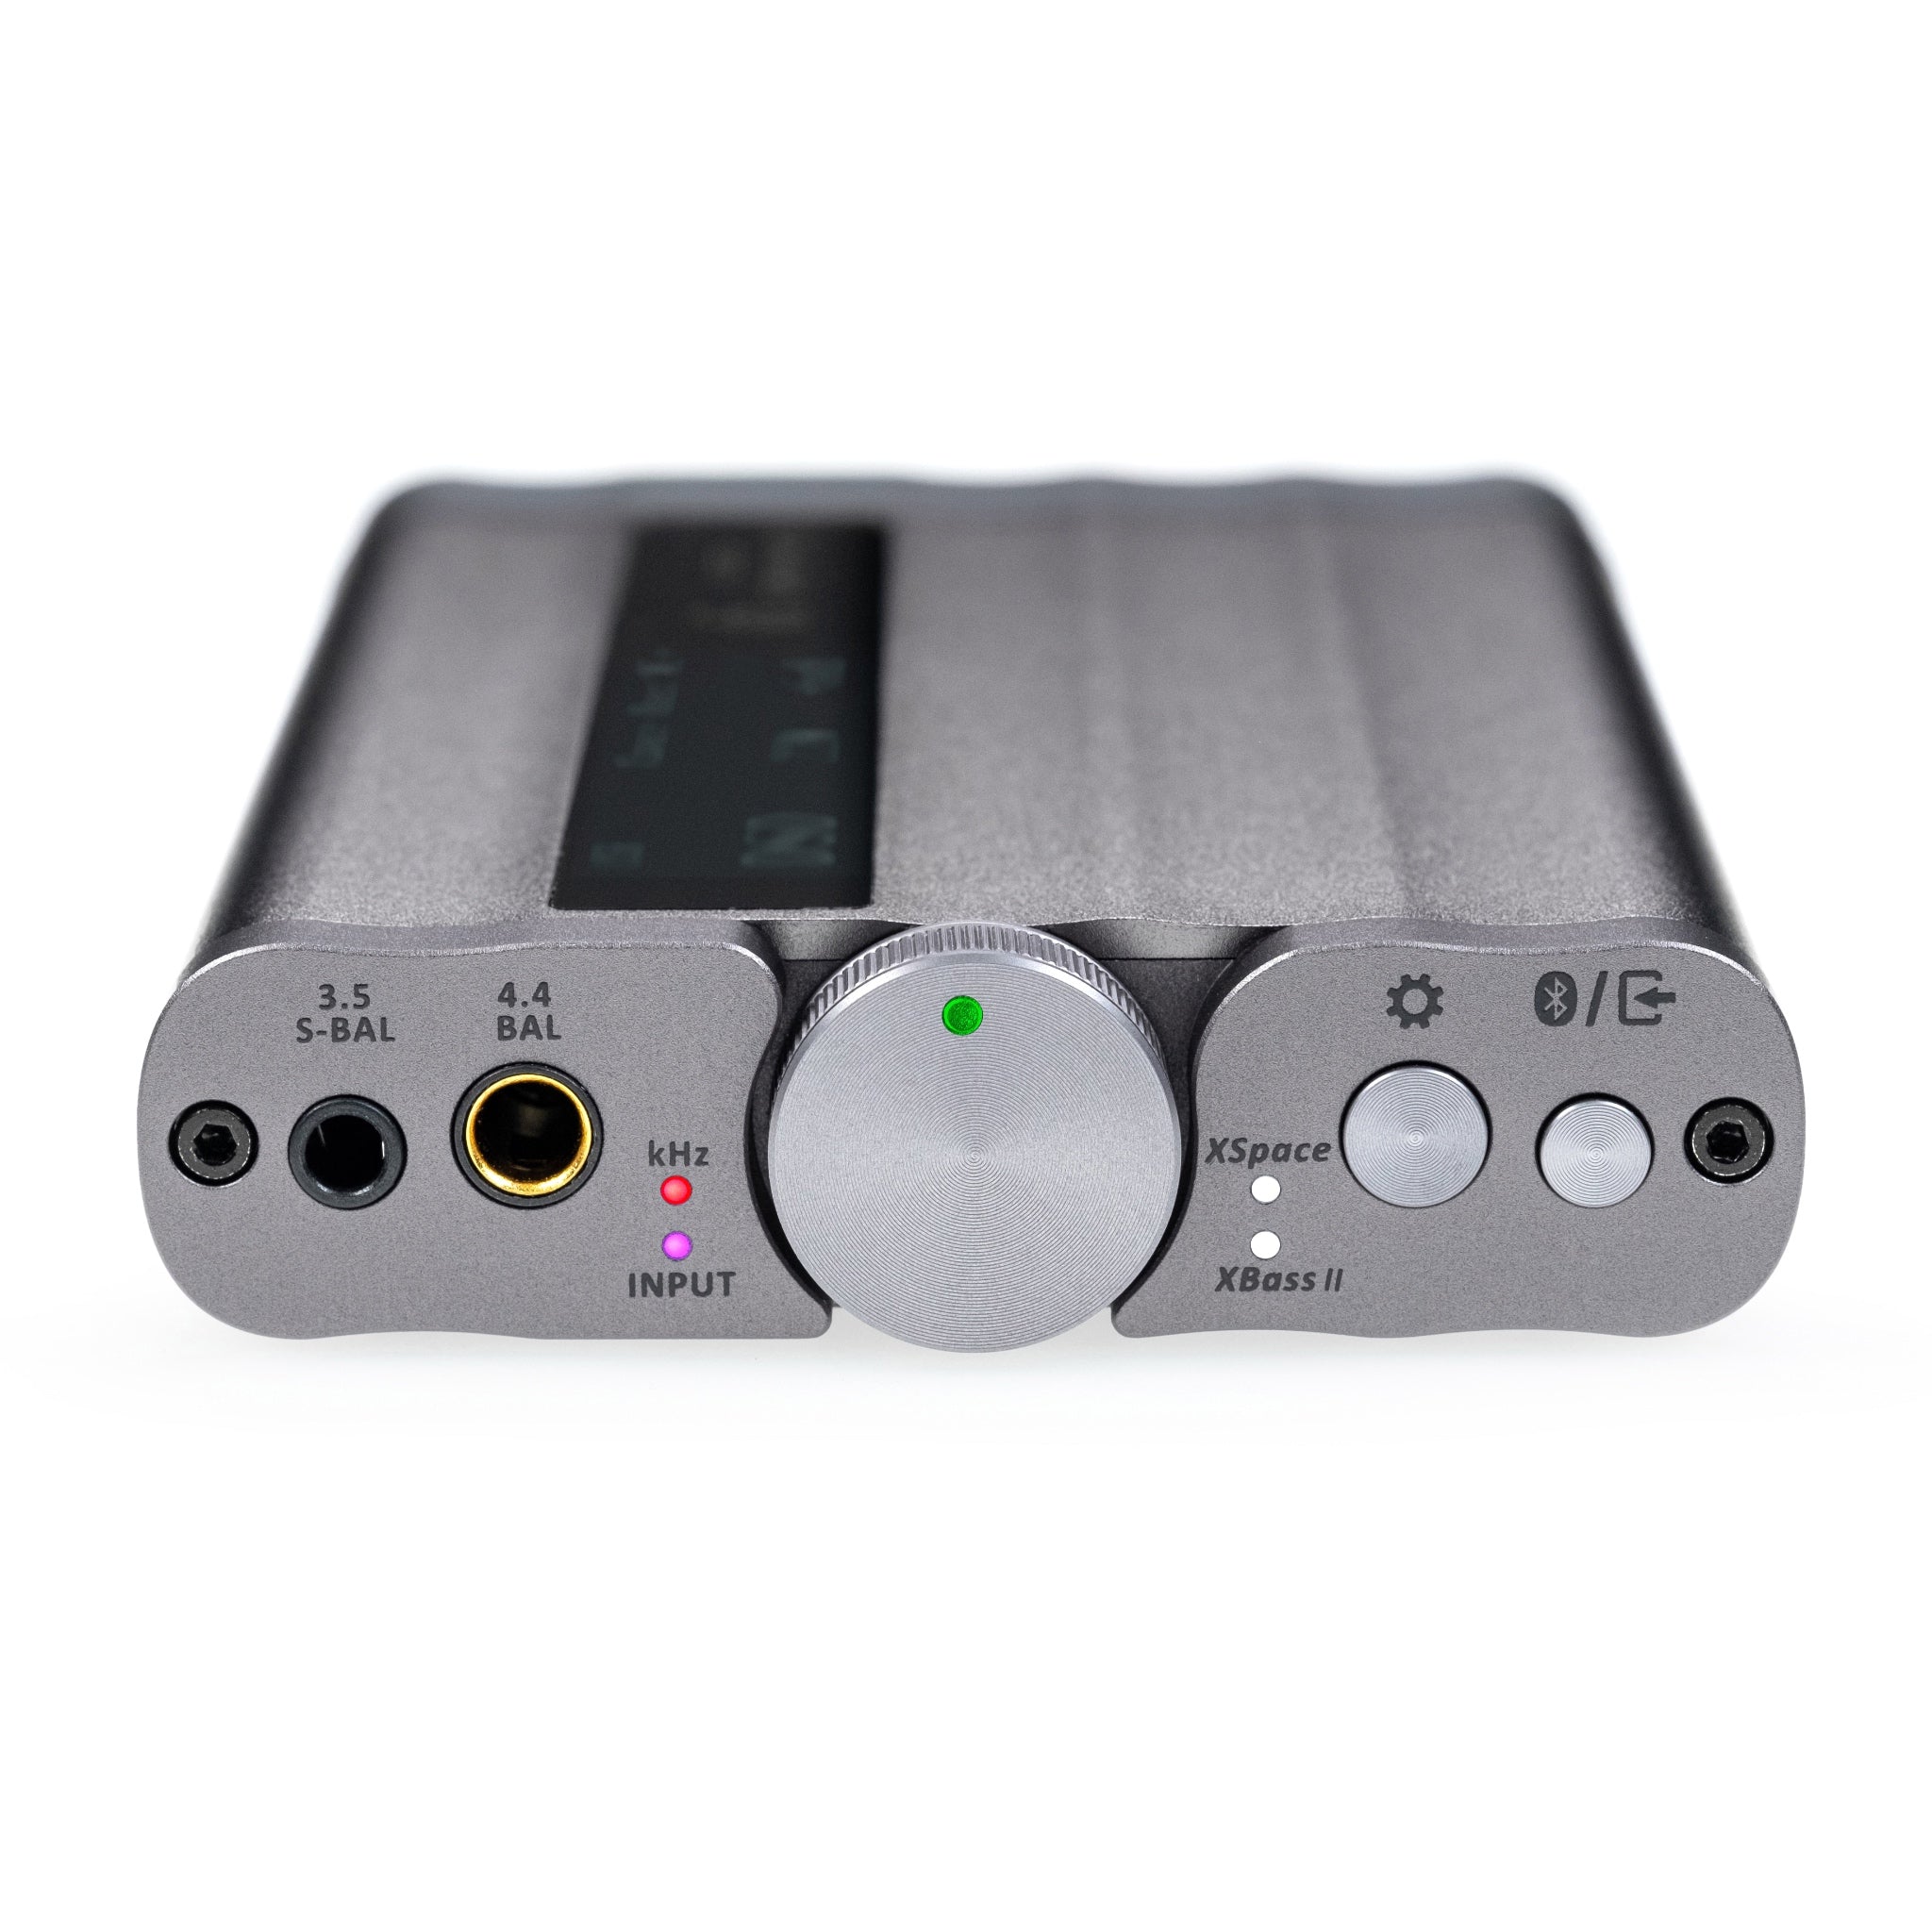 iFi xDSD Gryphon | Portable USB Bluetooth DAC and Amp - New